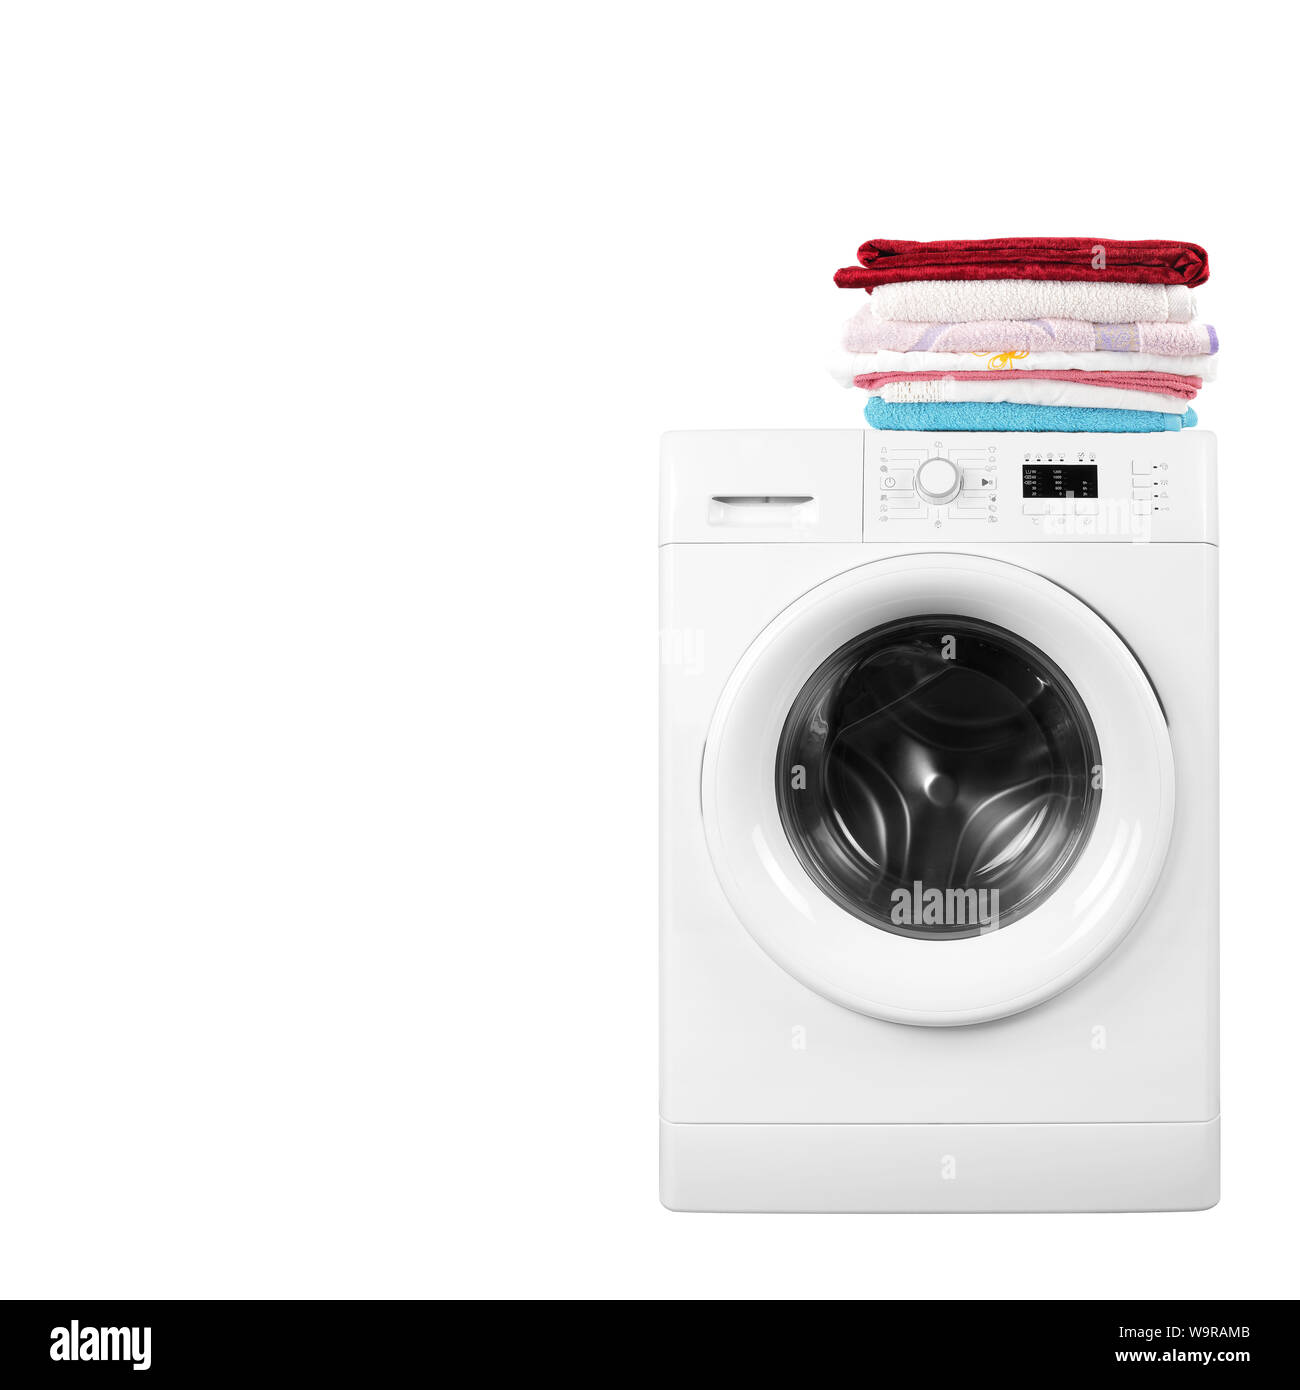 Major appliance - Front view washing machine and linen pile on a white background Stock Photo